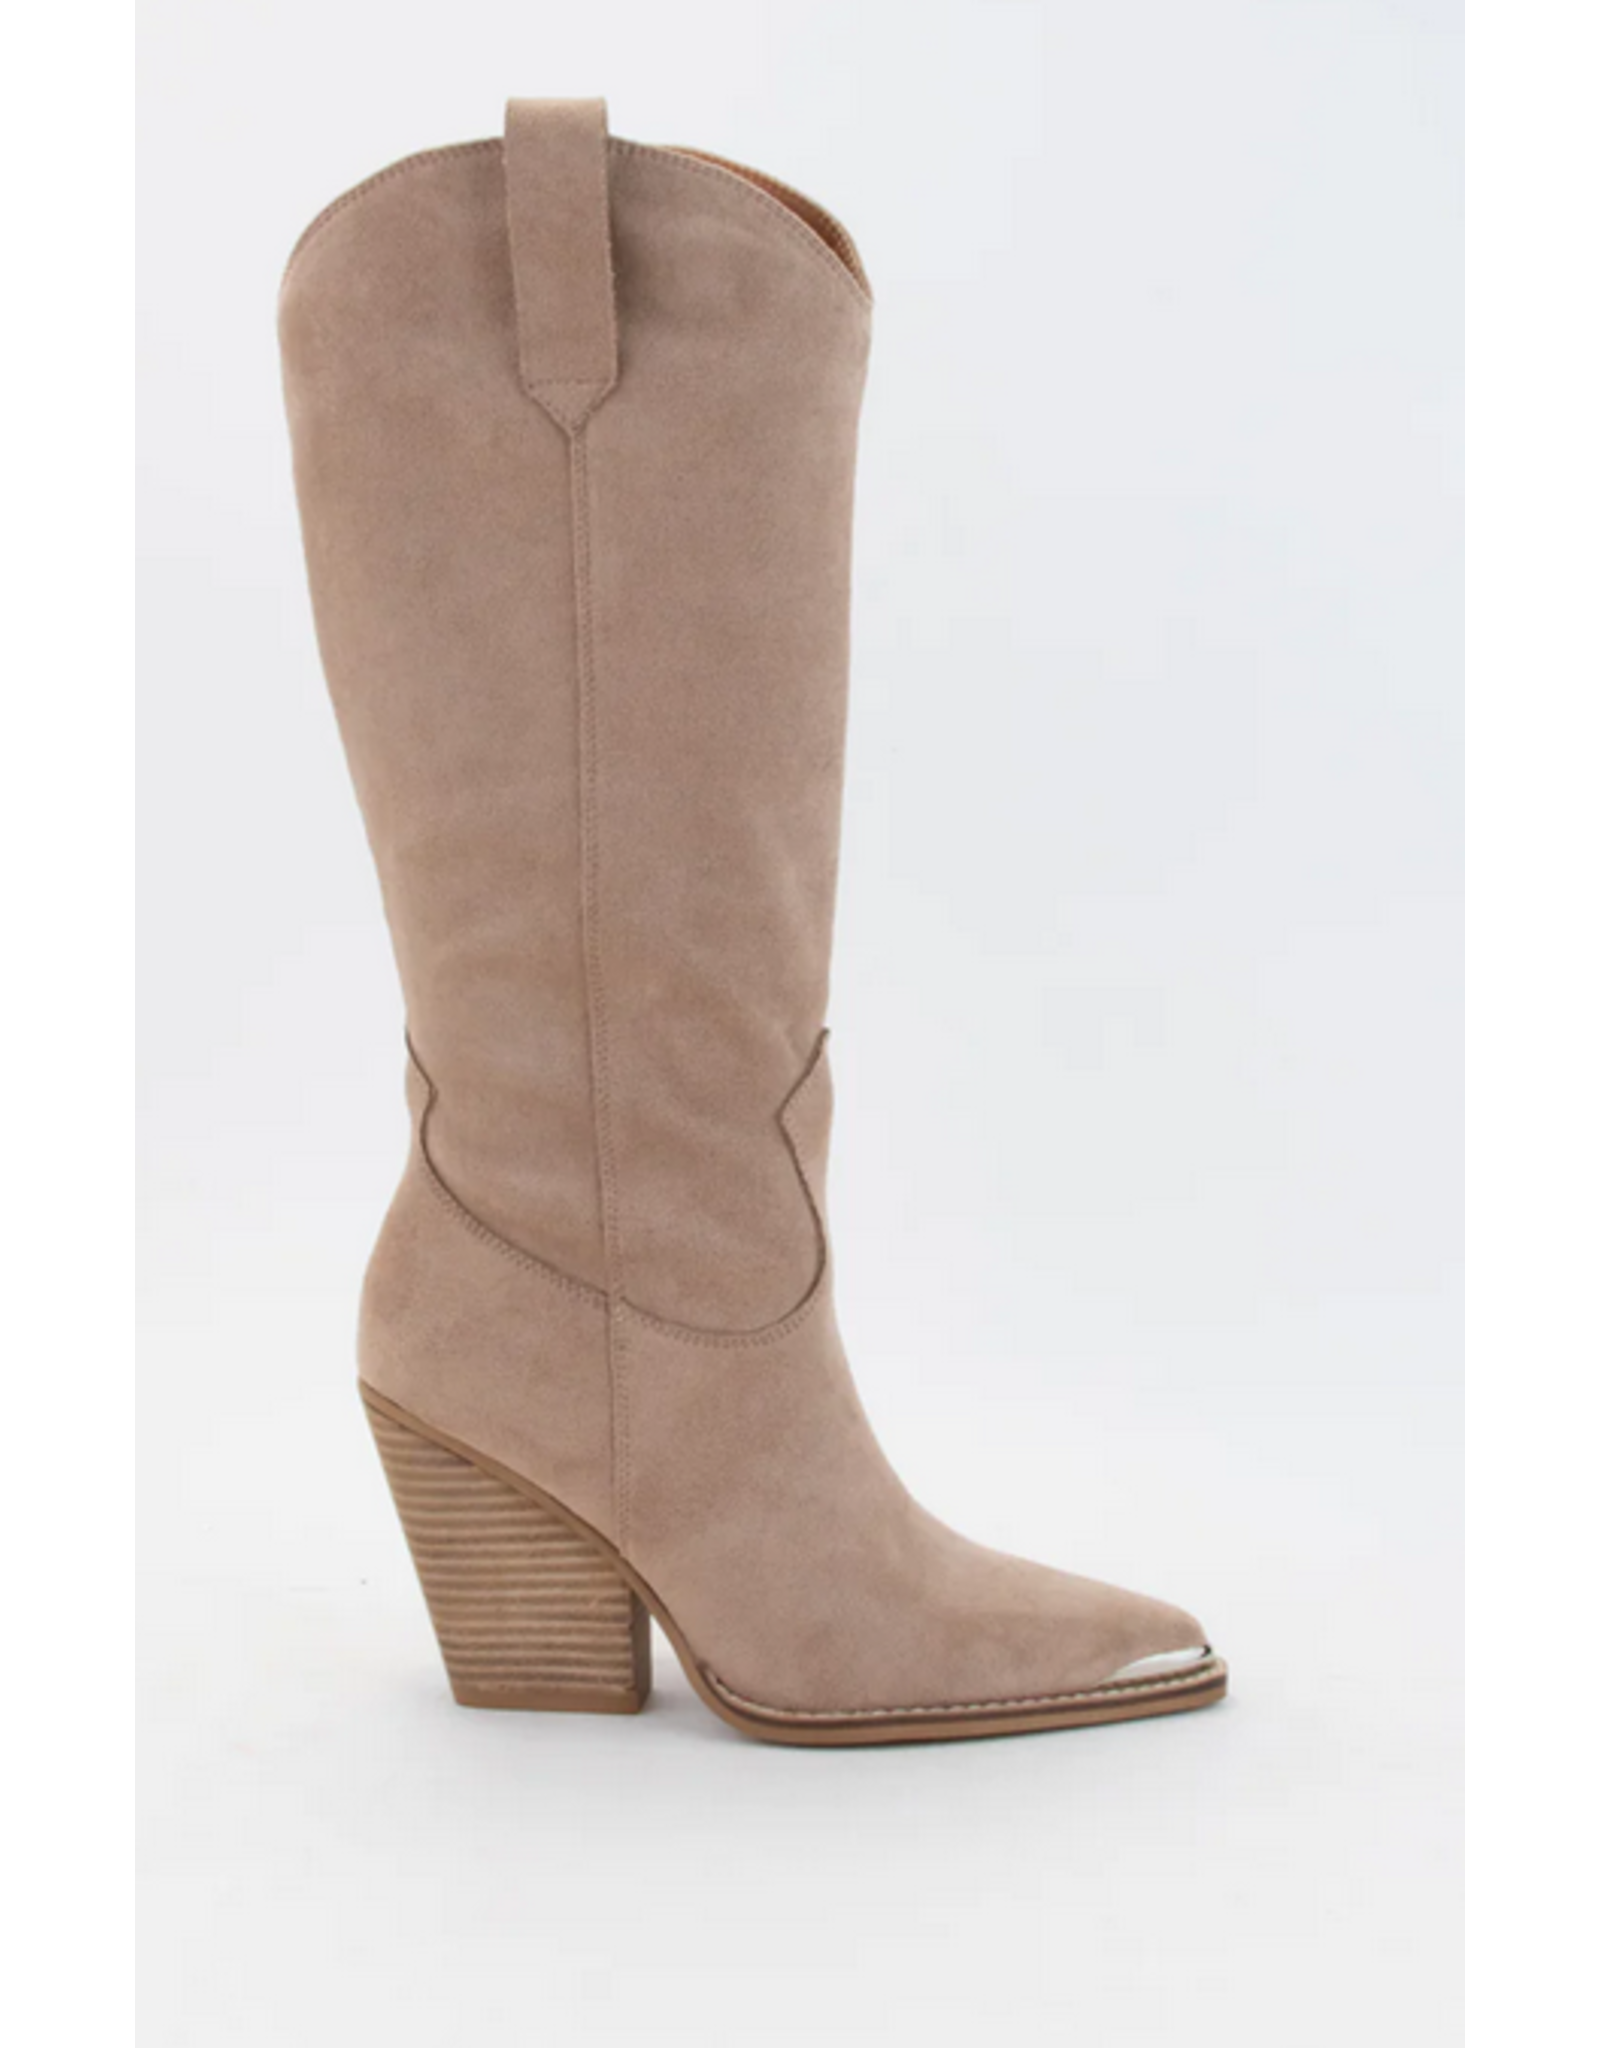 Cheyenne Boots in Taupe